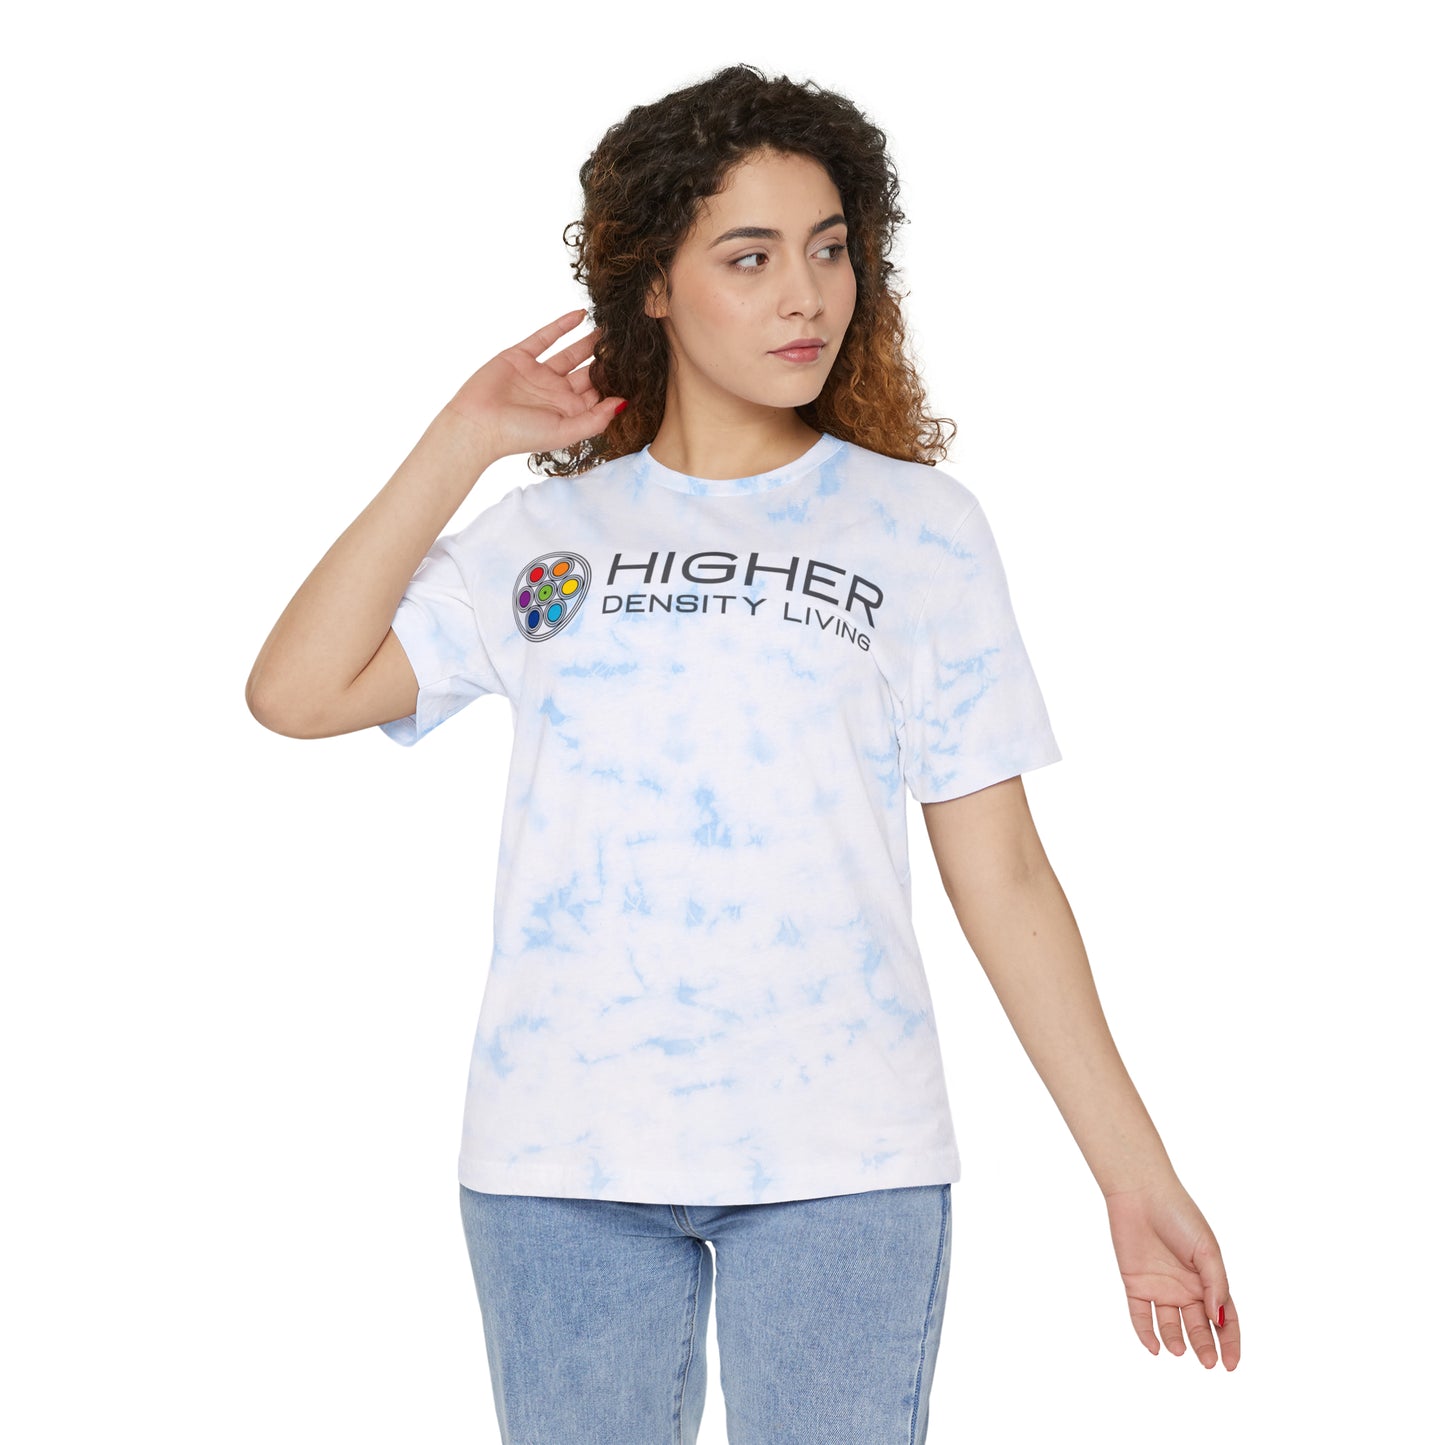 HDL Tie-Dyed T-Shirt: Wear the Spectrum of Higher Density Thinking